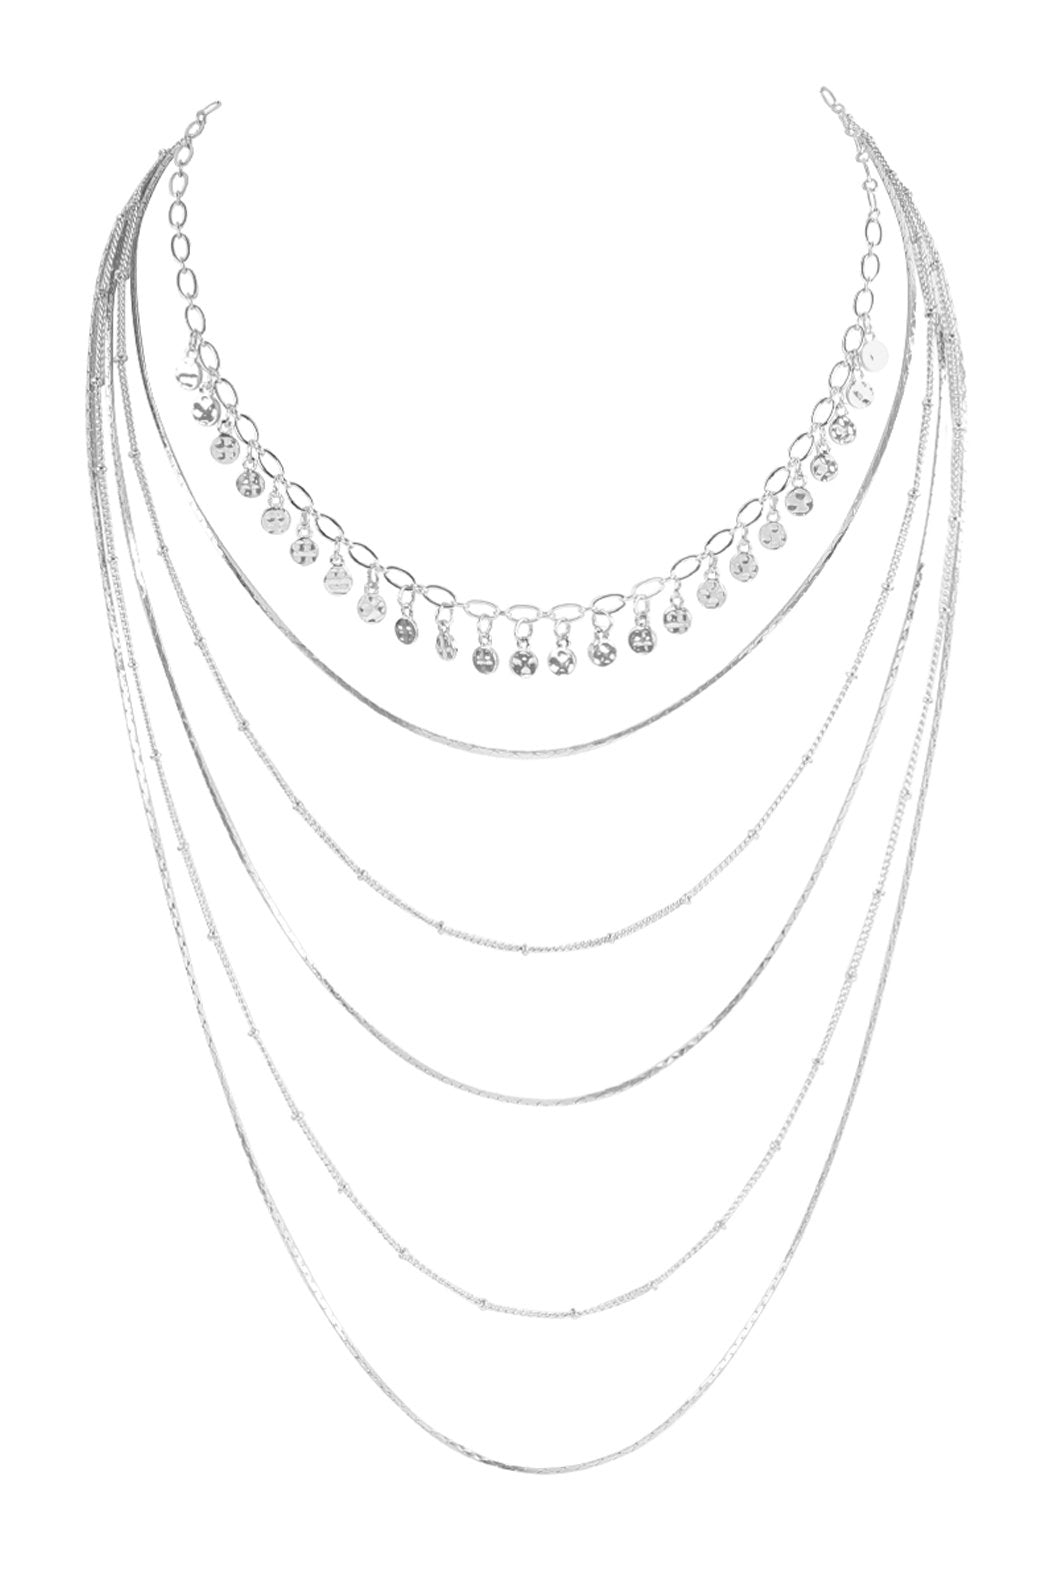 Hdn2640 - Delicate Layer Necklaces